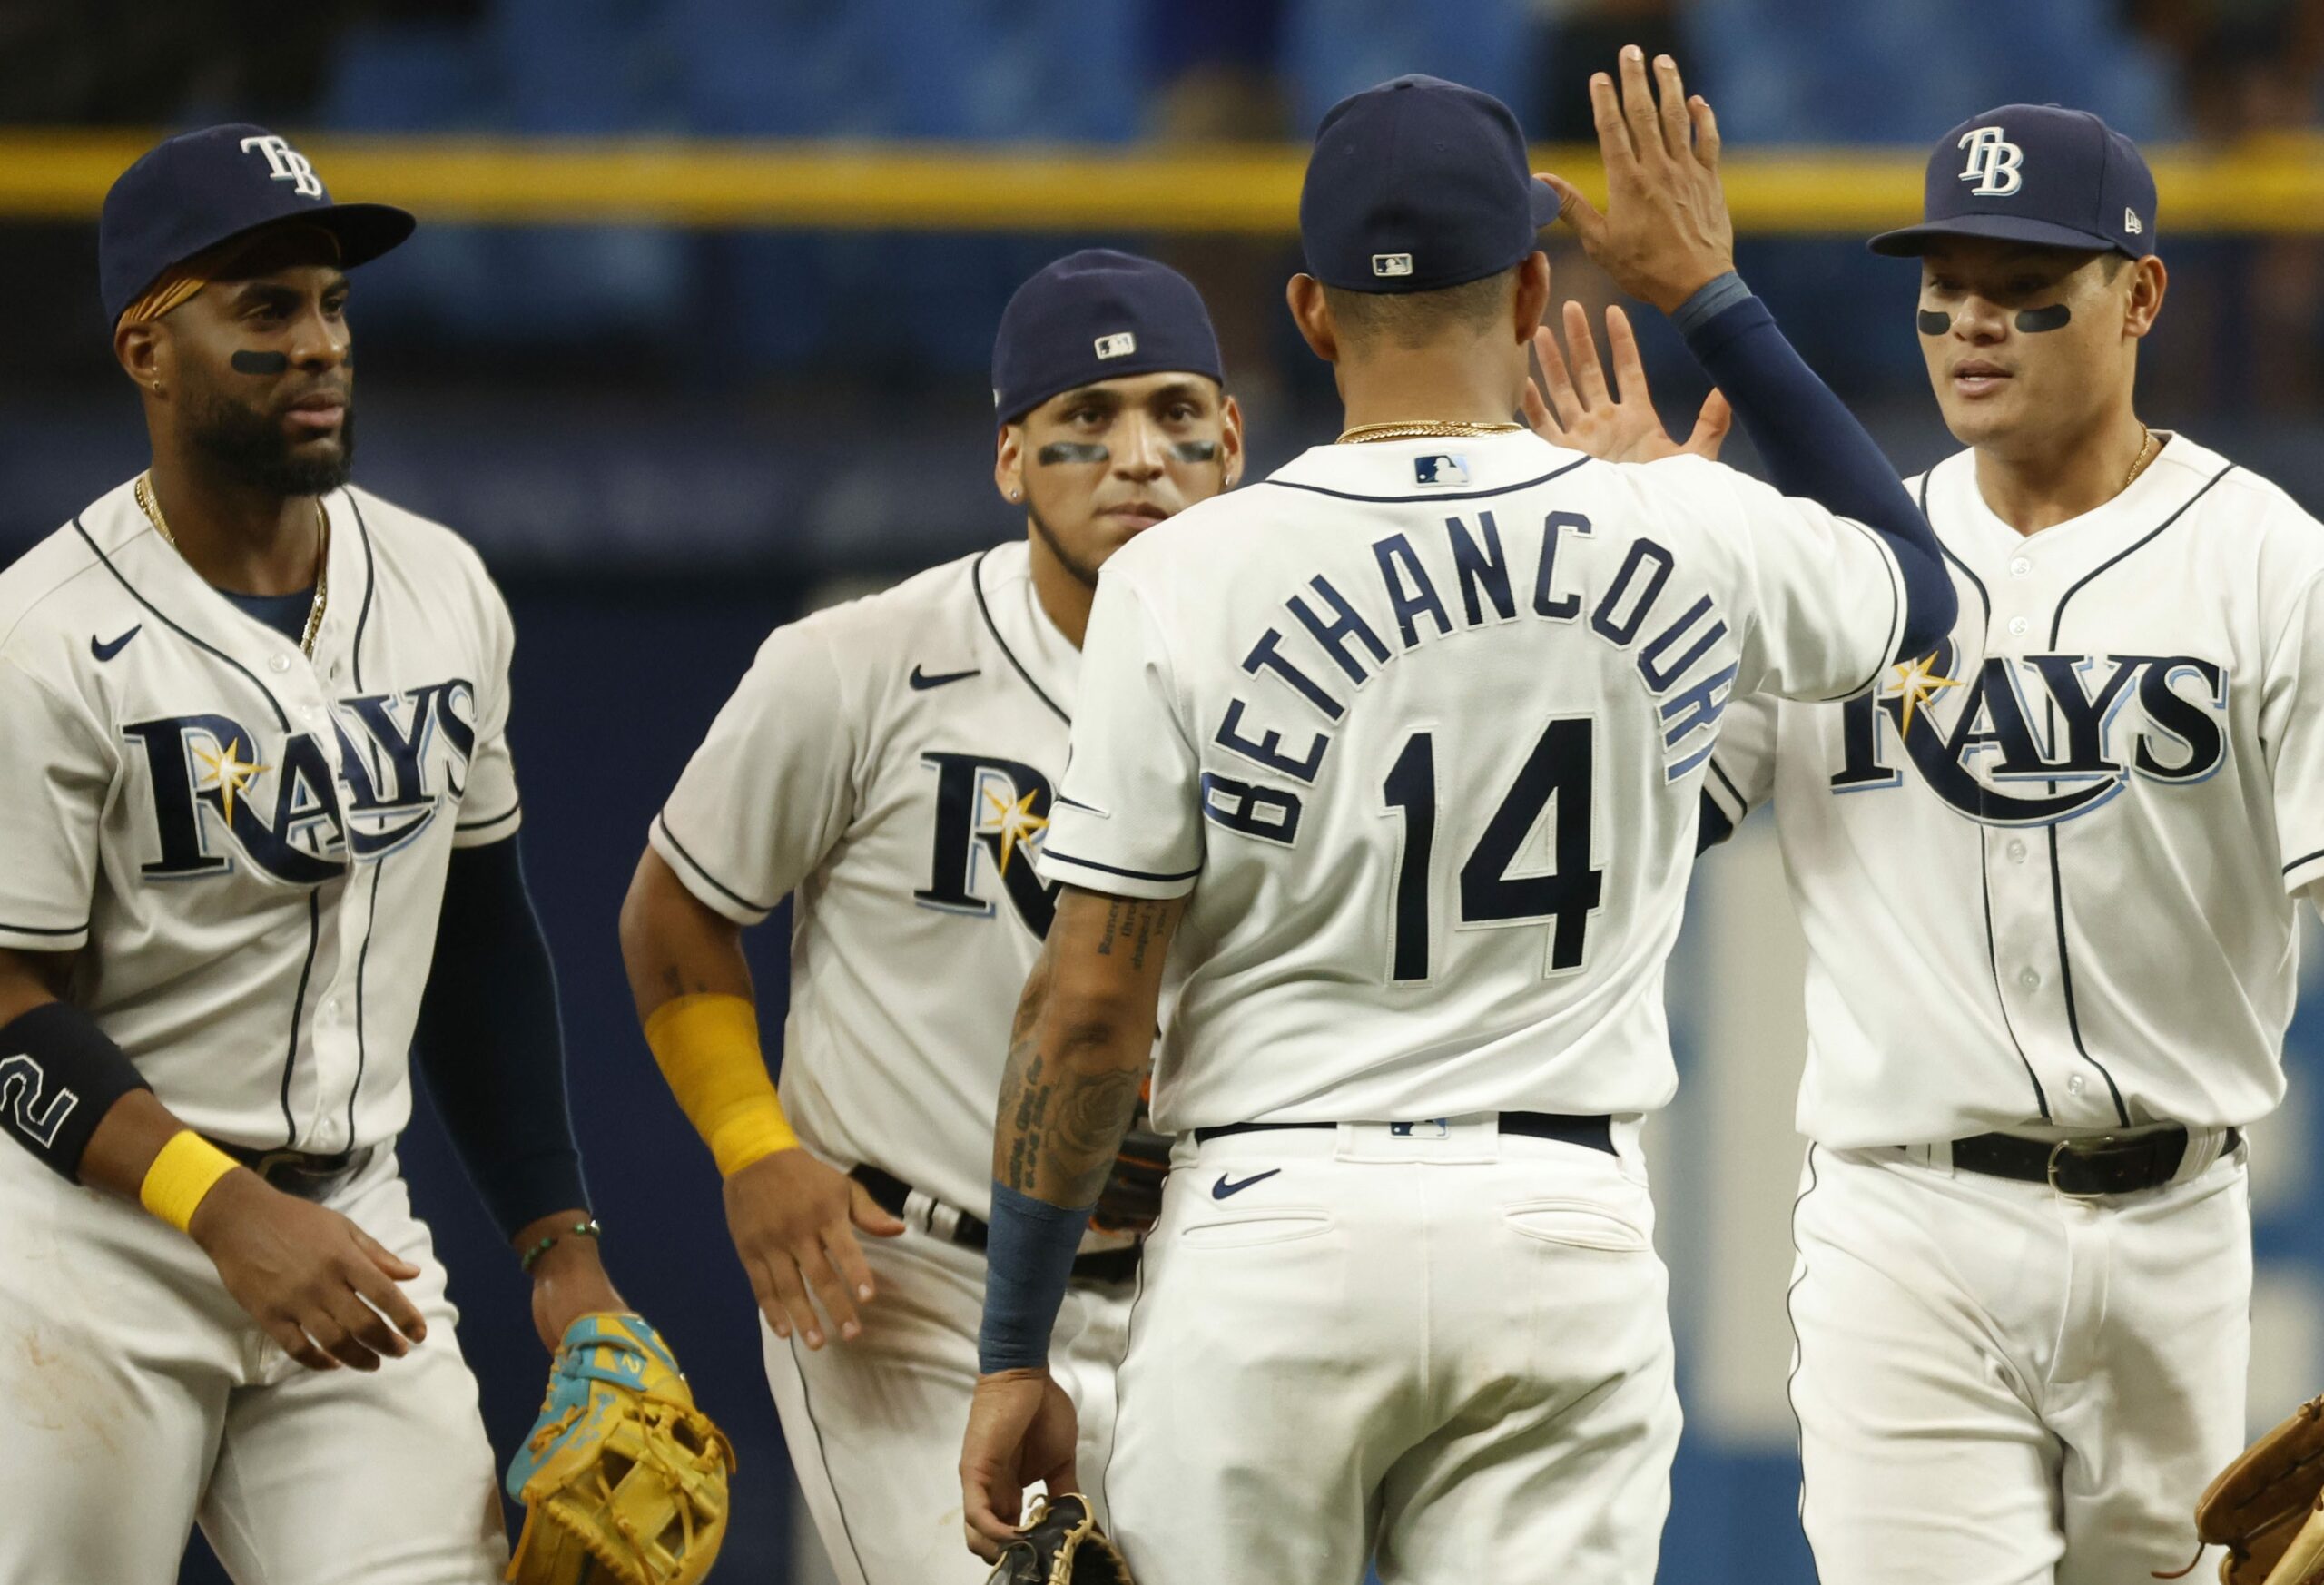 Houston Astros at Tampa Bay Rays odds, picks and predictions